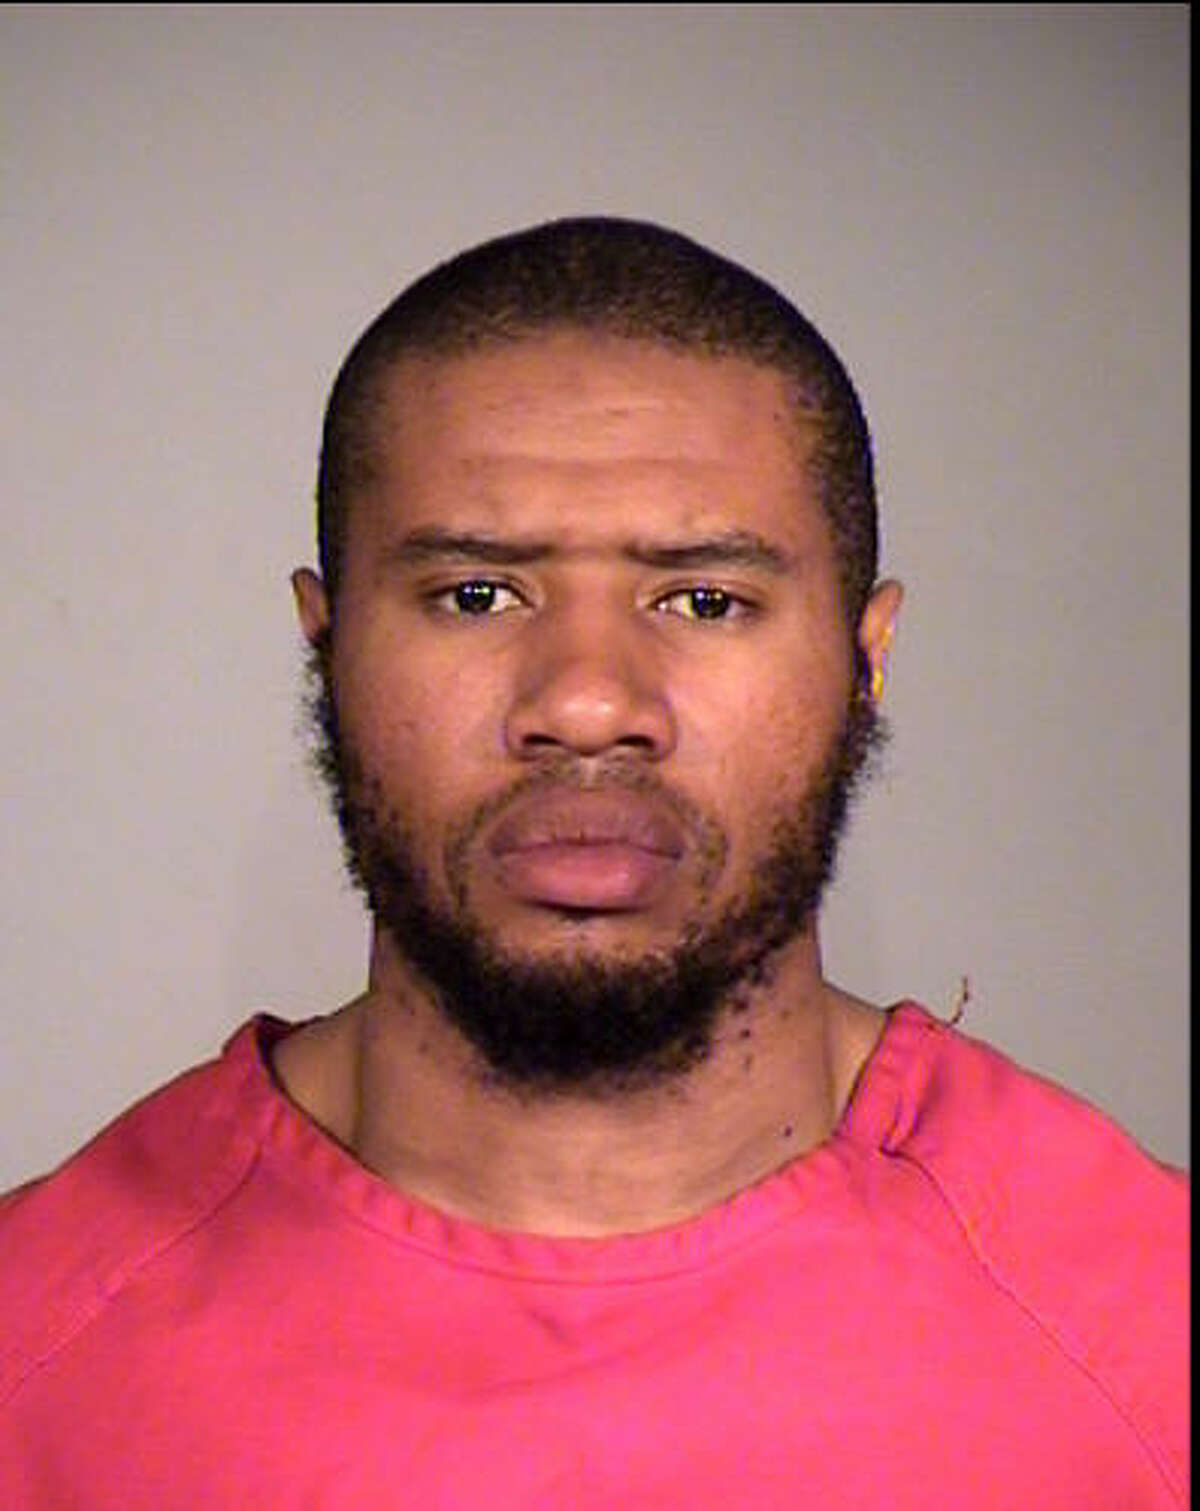 Ali Muhammad Brown, pictured in a photo provided by the Seattle Police Department.